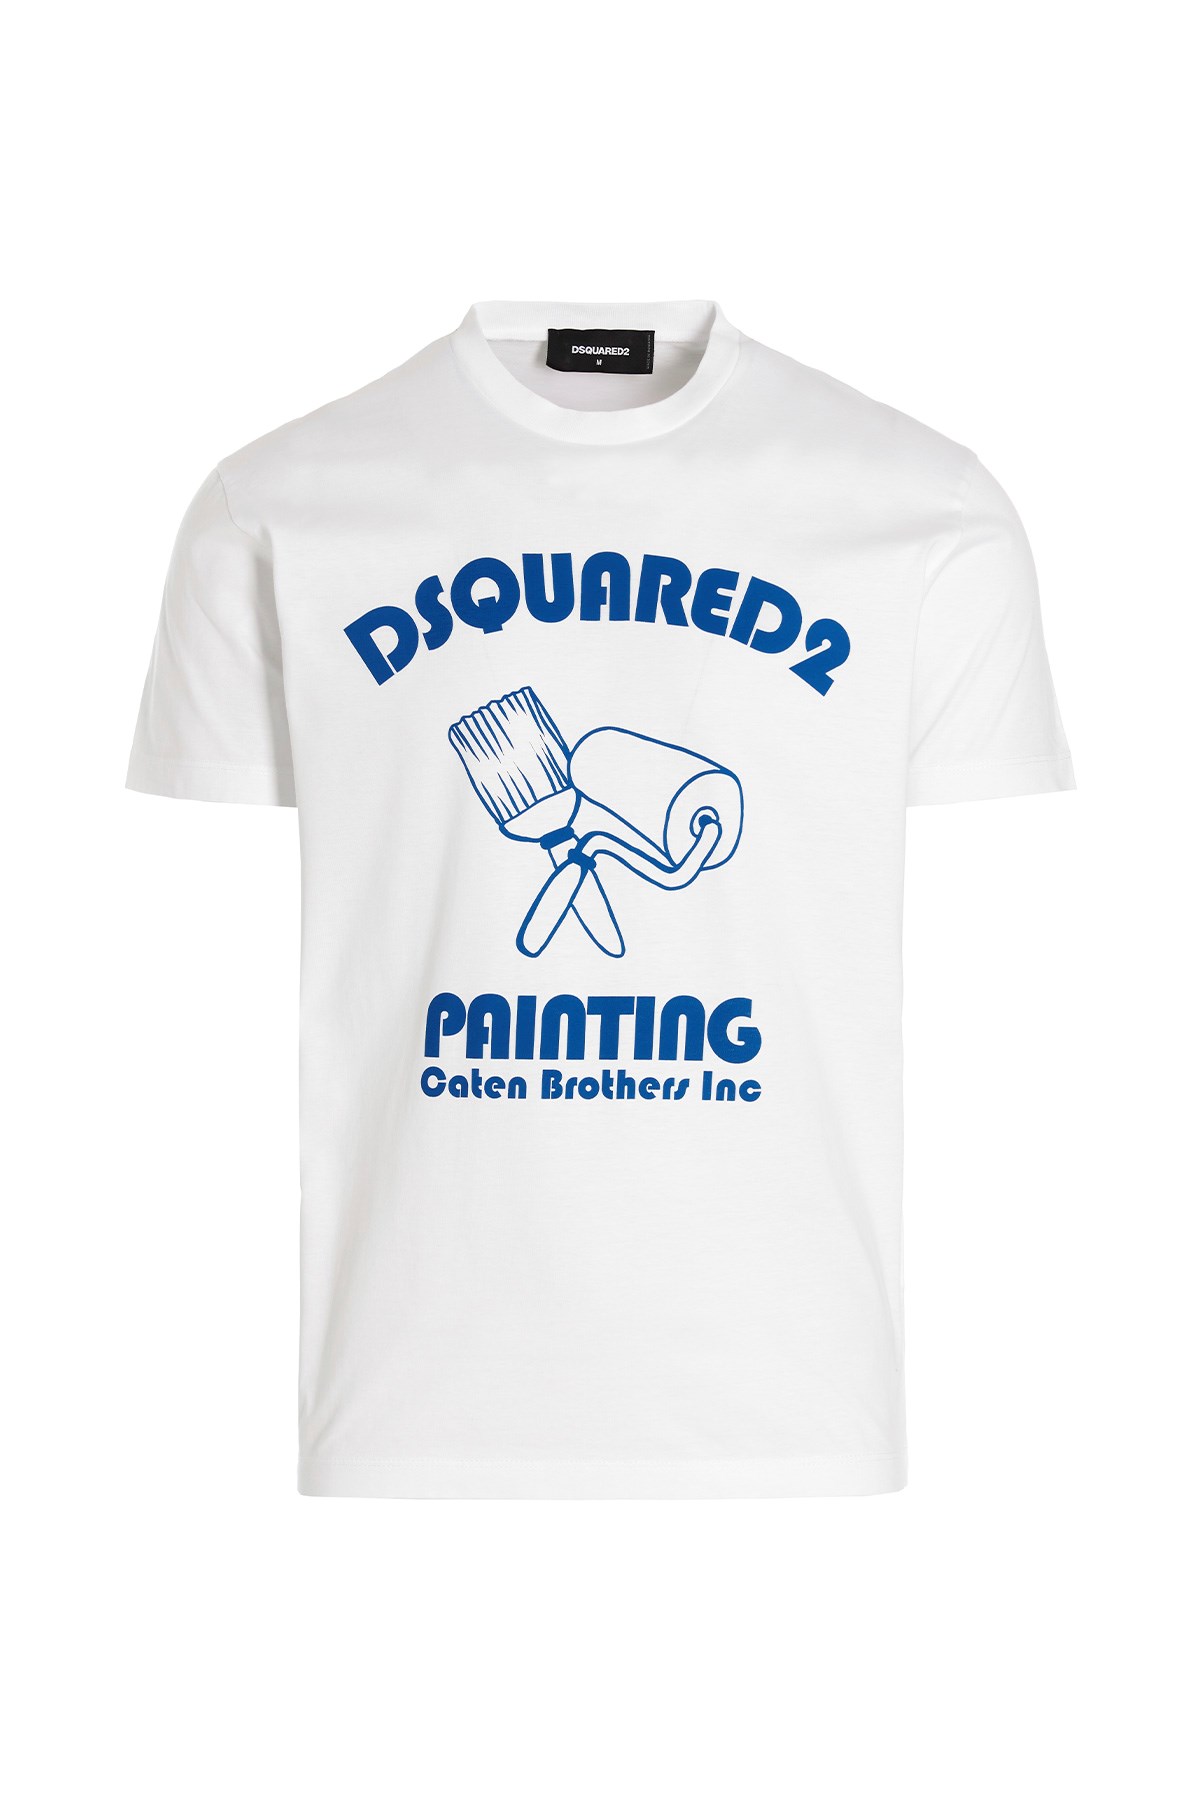 DSQUARED2 T-Shirt 'Painting'